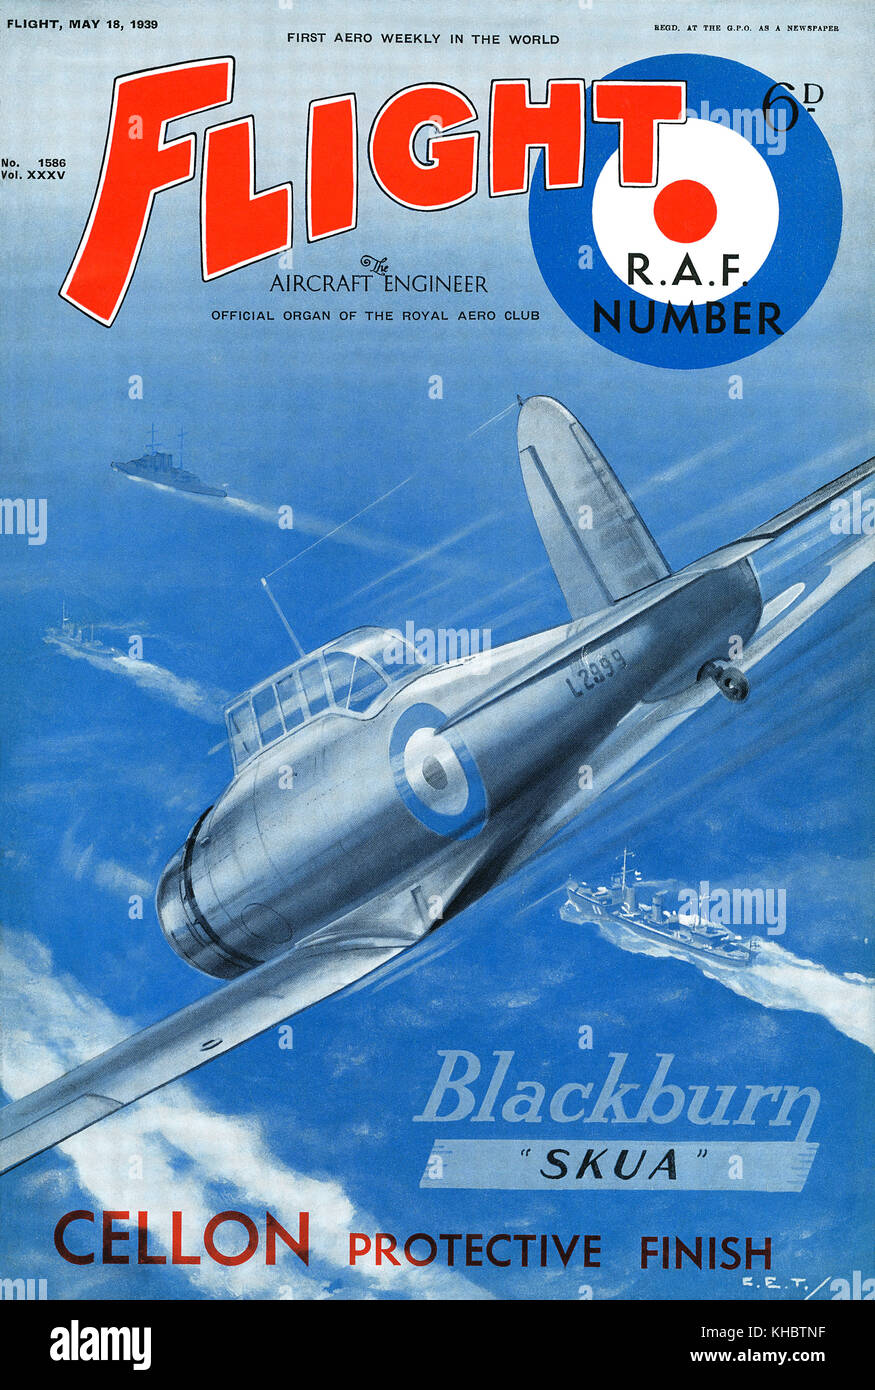 Front cover of Flight magazine for 18th May 1939, featuring an advertisement for Cellon protective finish, as used on the Blackburn Skua aircraft. Stock Photo